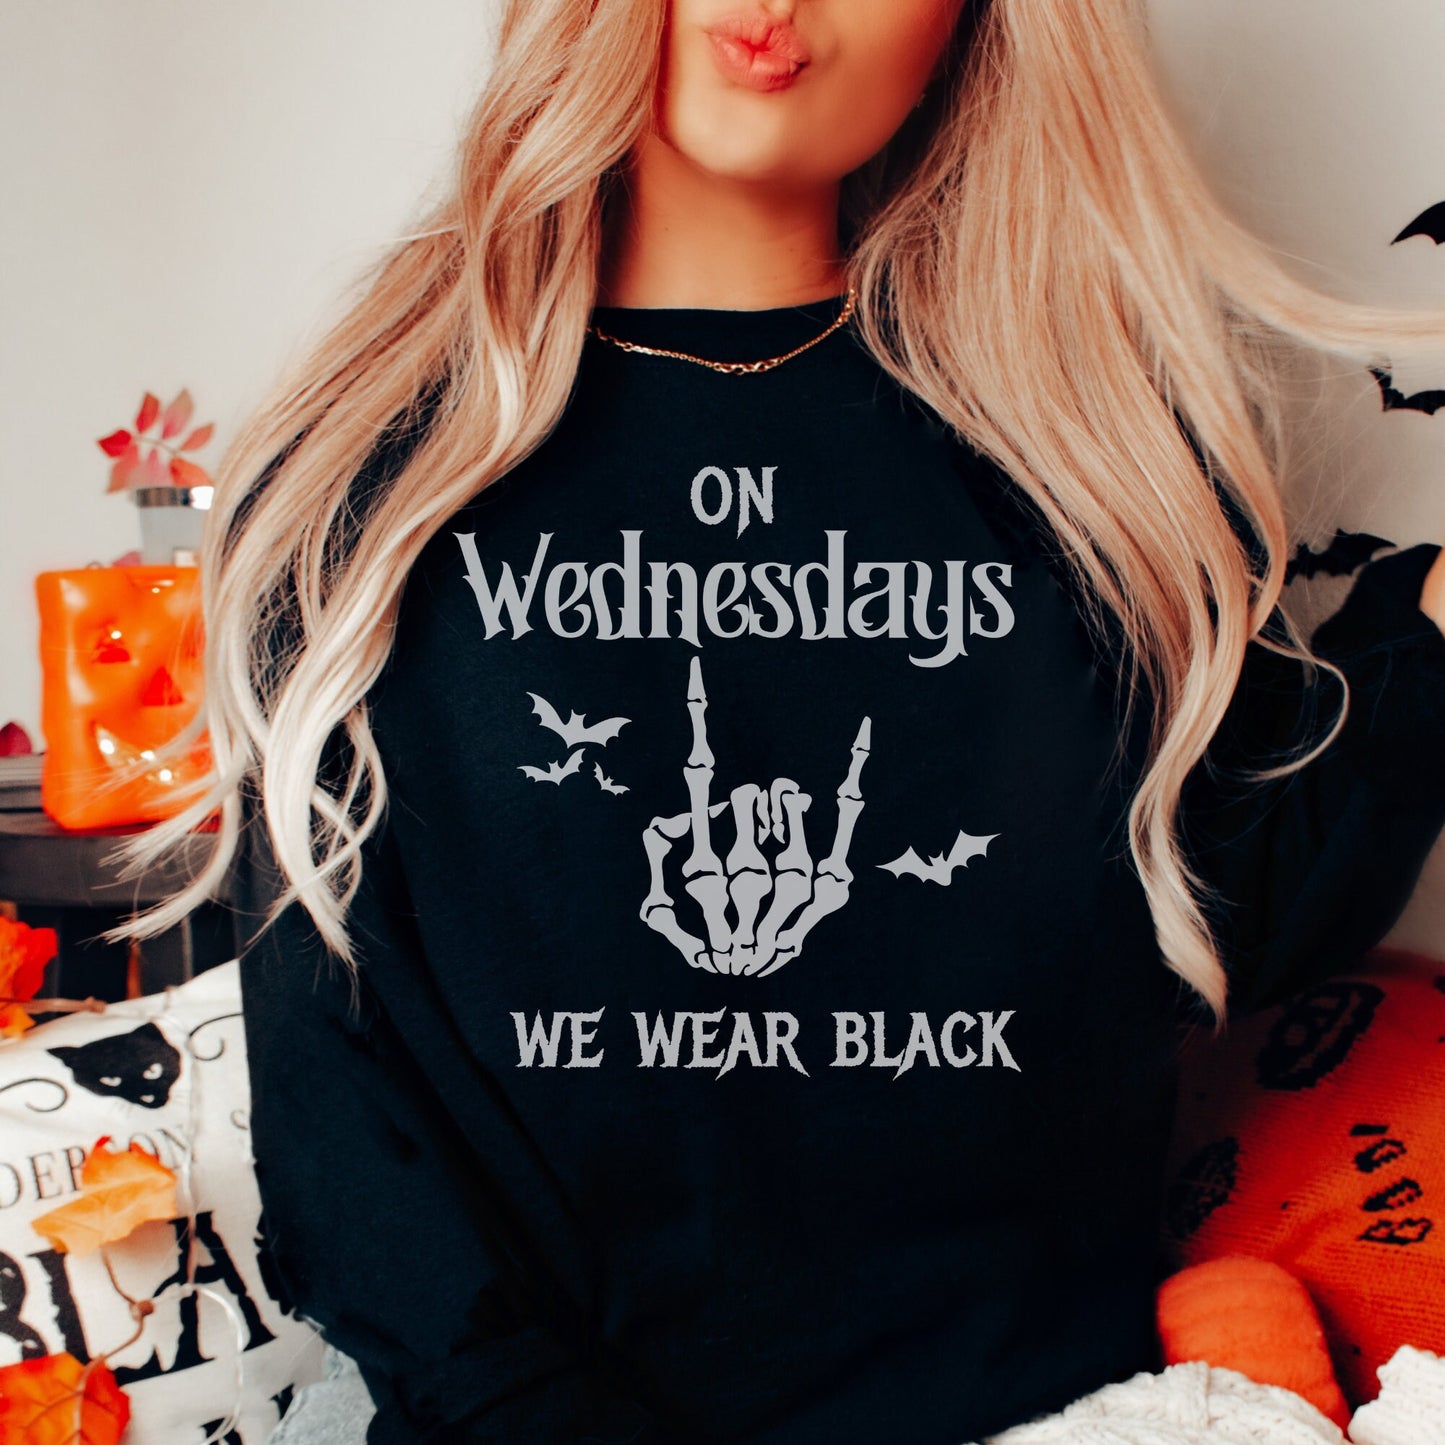 On Wednesdays We Wear Black, Comfort Colors, Halloween Shirt, Spooky Shirt, Spooky tee, Wednesday Addams, Witchy shirt, witch gift